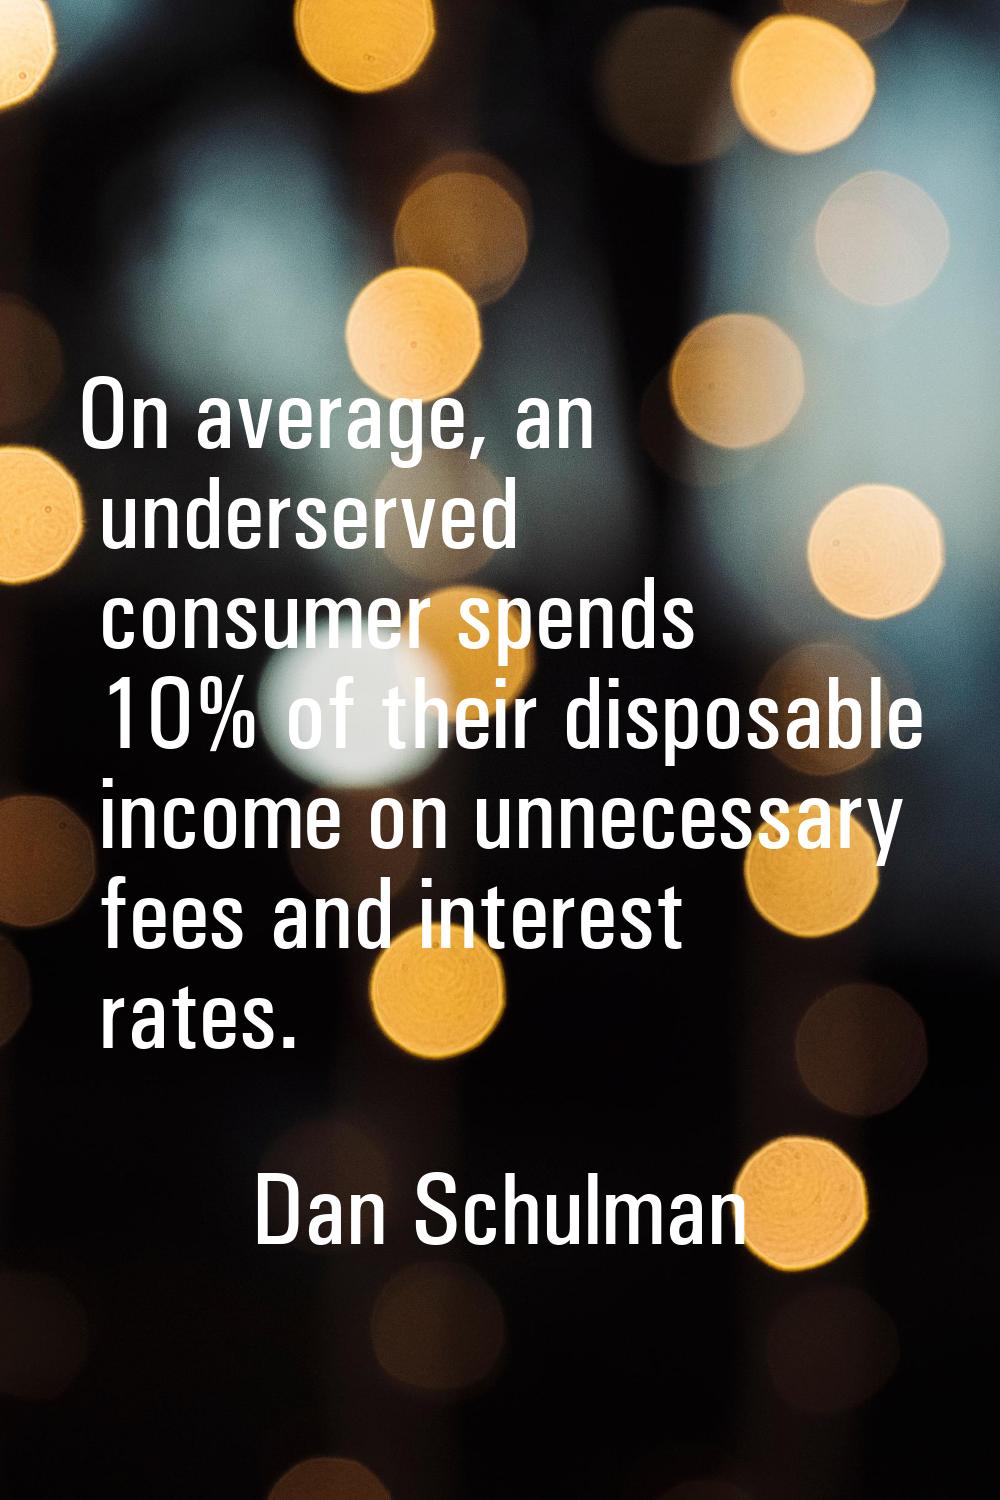 On average, an underserved consumer spends 10% of their disposable income on unnecessary fees and i